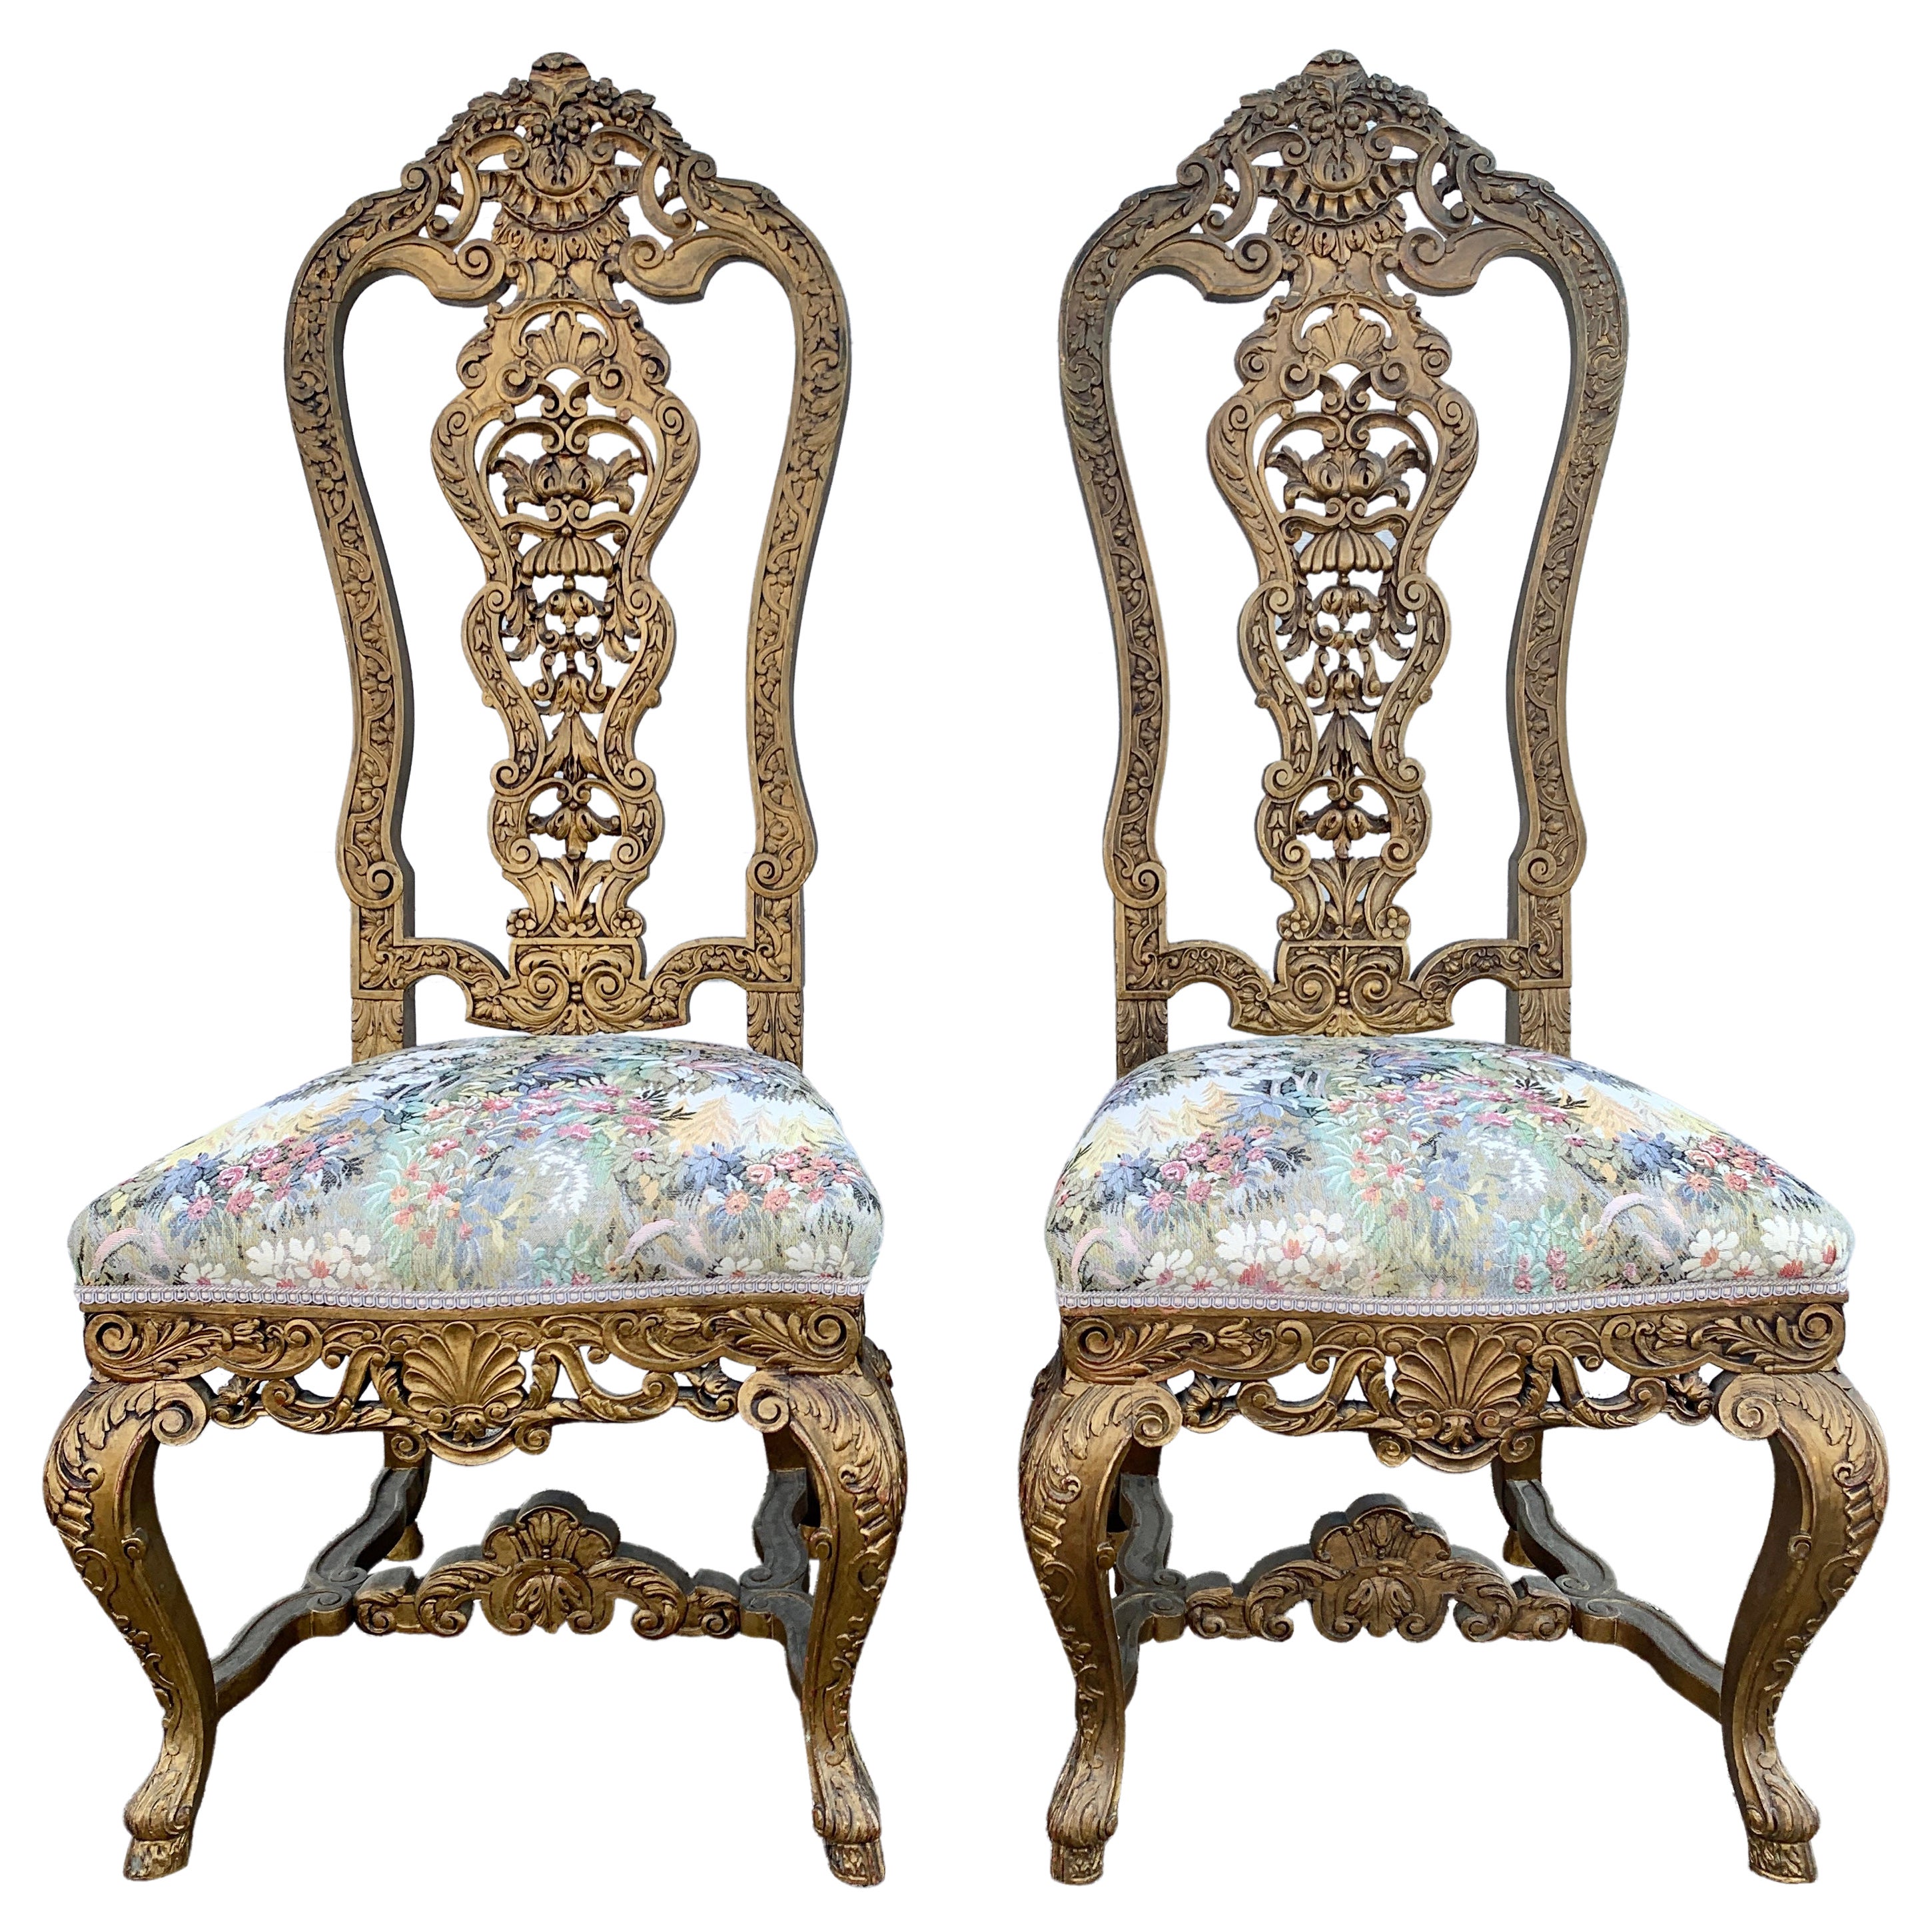 19th Century Antique Venetian Carved Gold Giltwood Throne Chairs, Pair For Sale